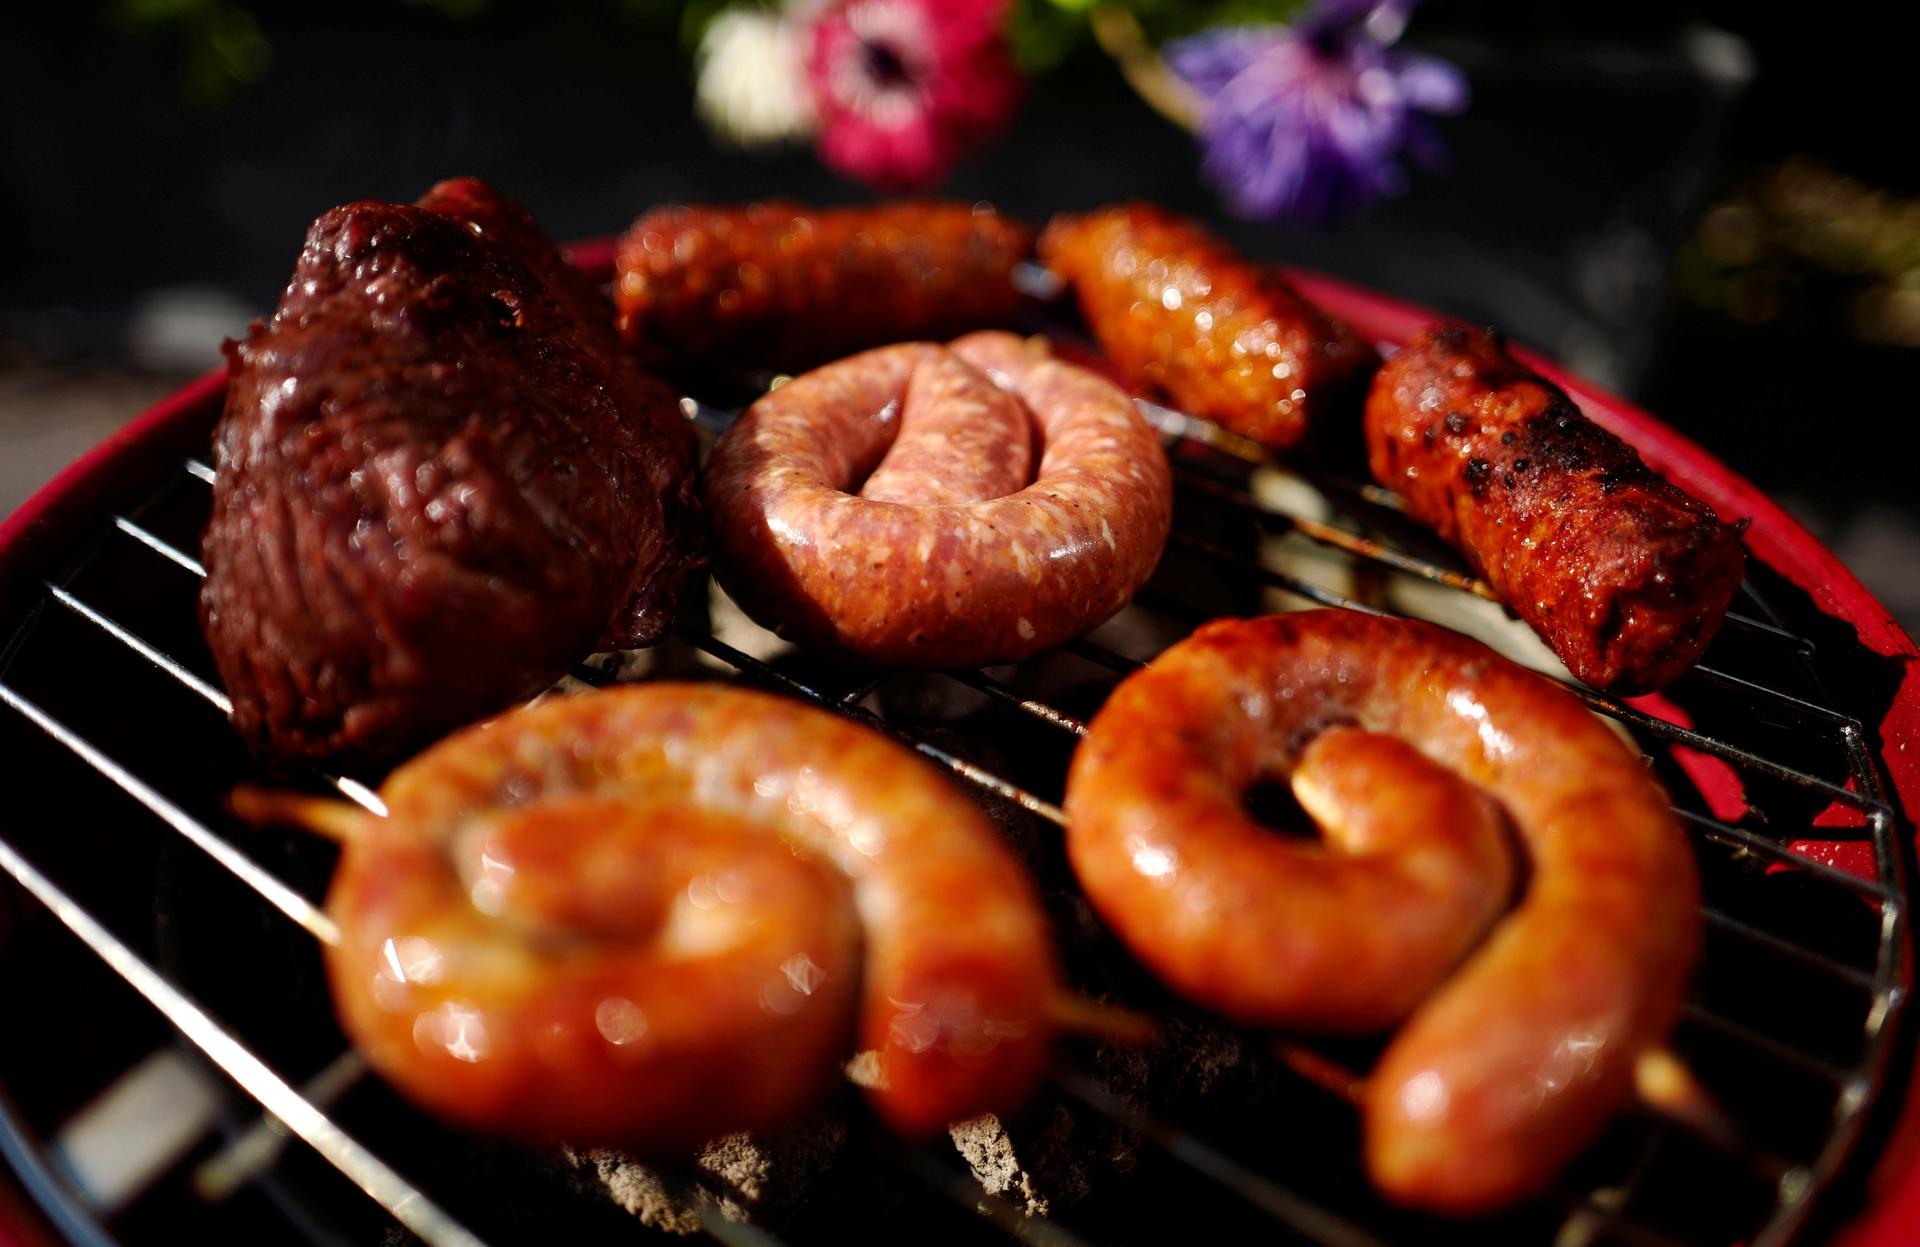 Sausages and meat grill on a charcoal barbecue in a garden in Hanau near Frankfurt, Germany, June 7, 2016.